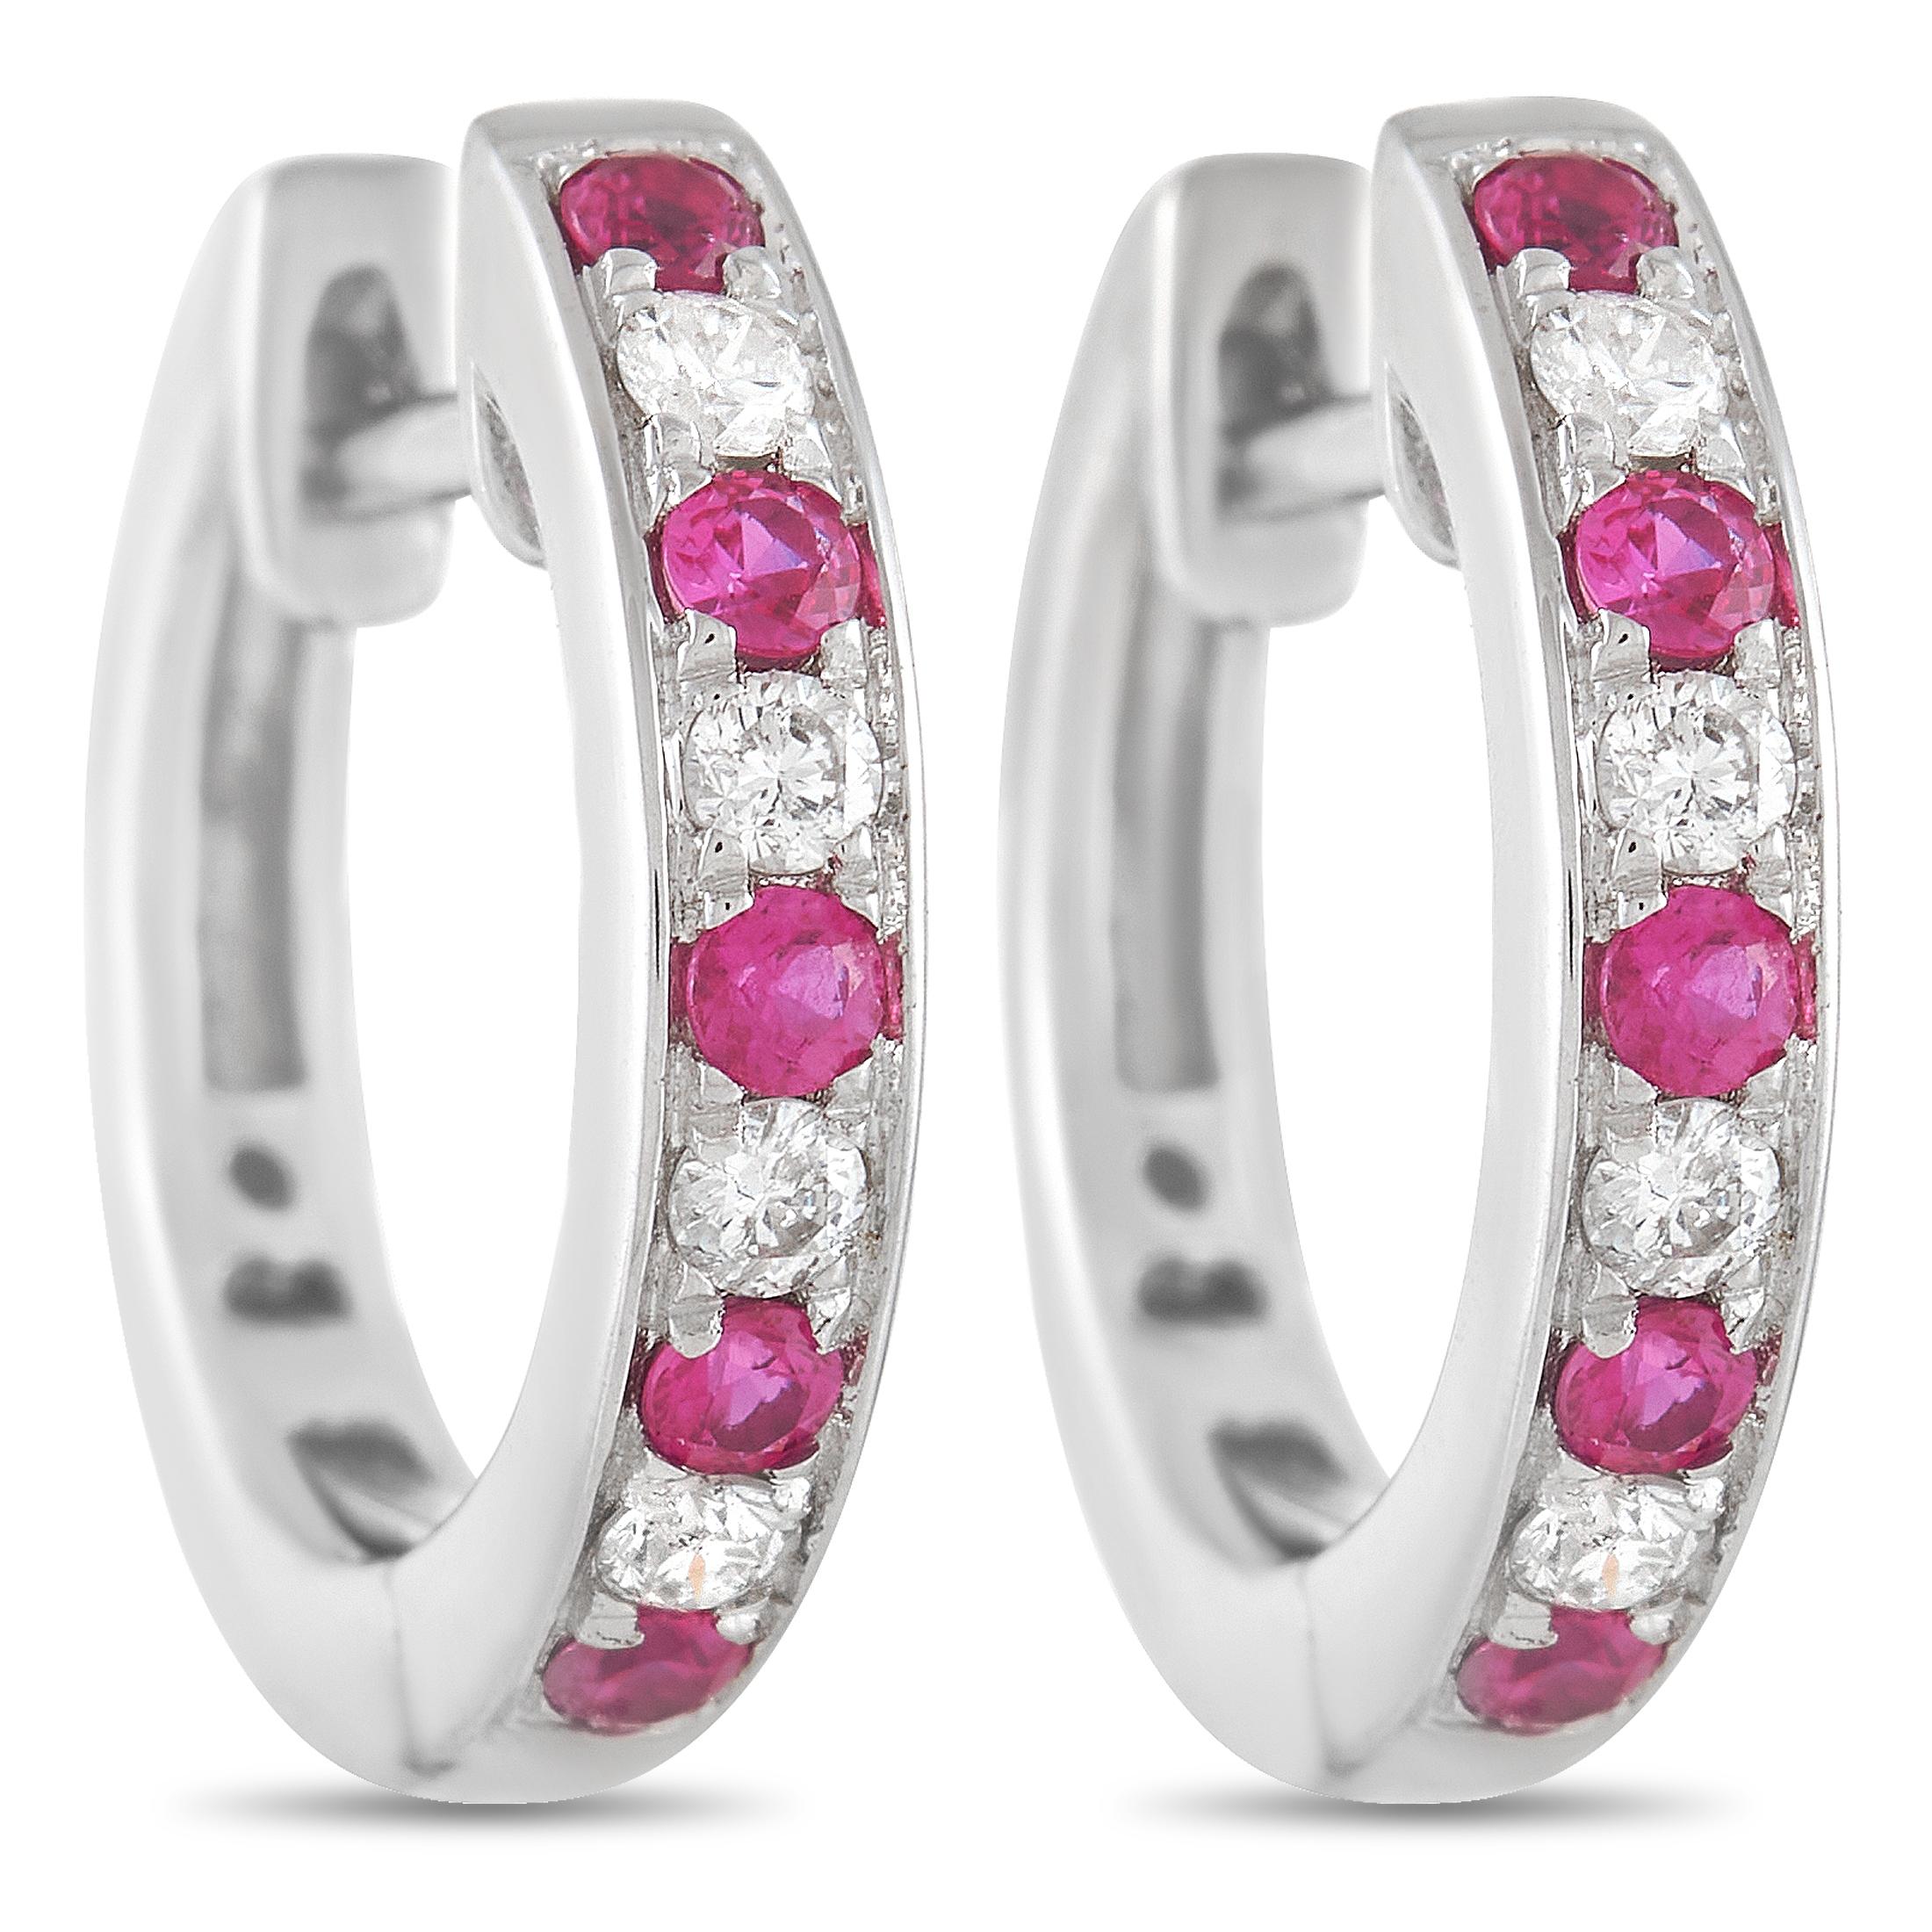 LB Exclusive 14K White Gold 0.15 Ct Diamond and 0.25 Ct Ruby Hoop Earrings In New Condition For Sale In Southampton, PA